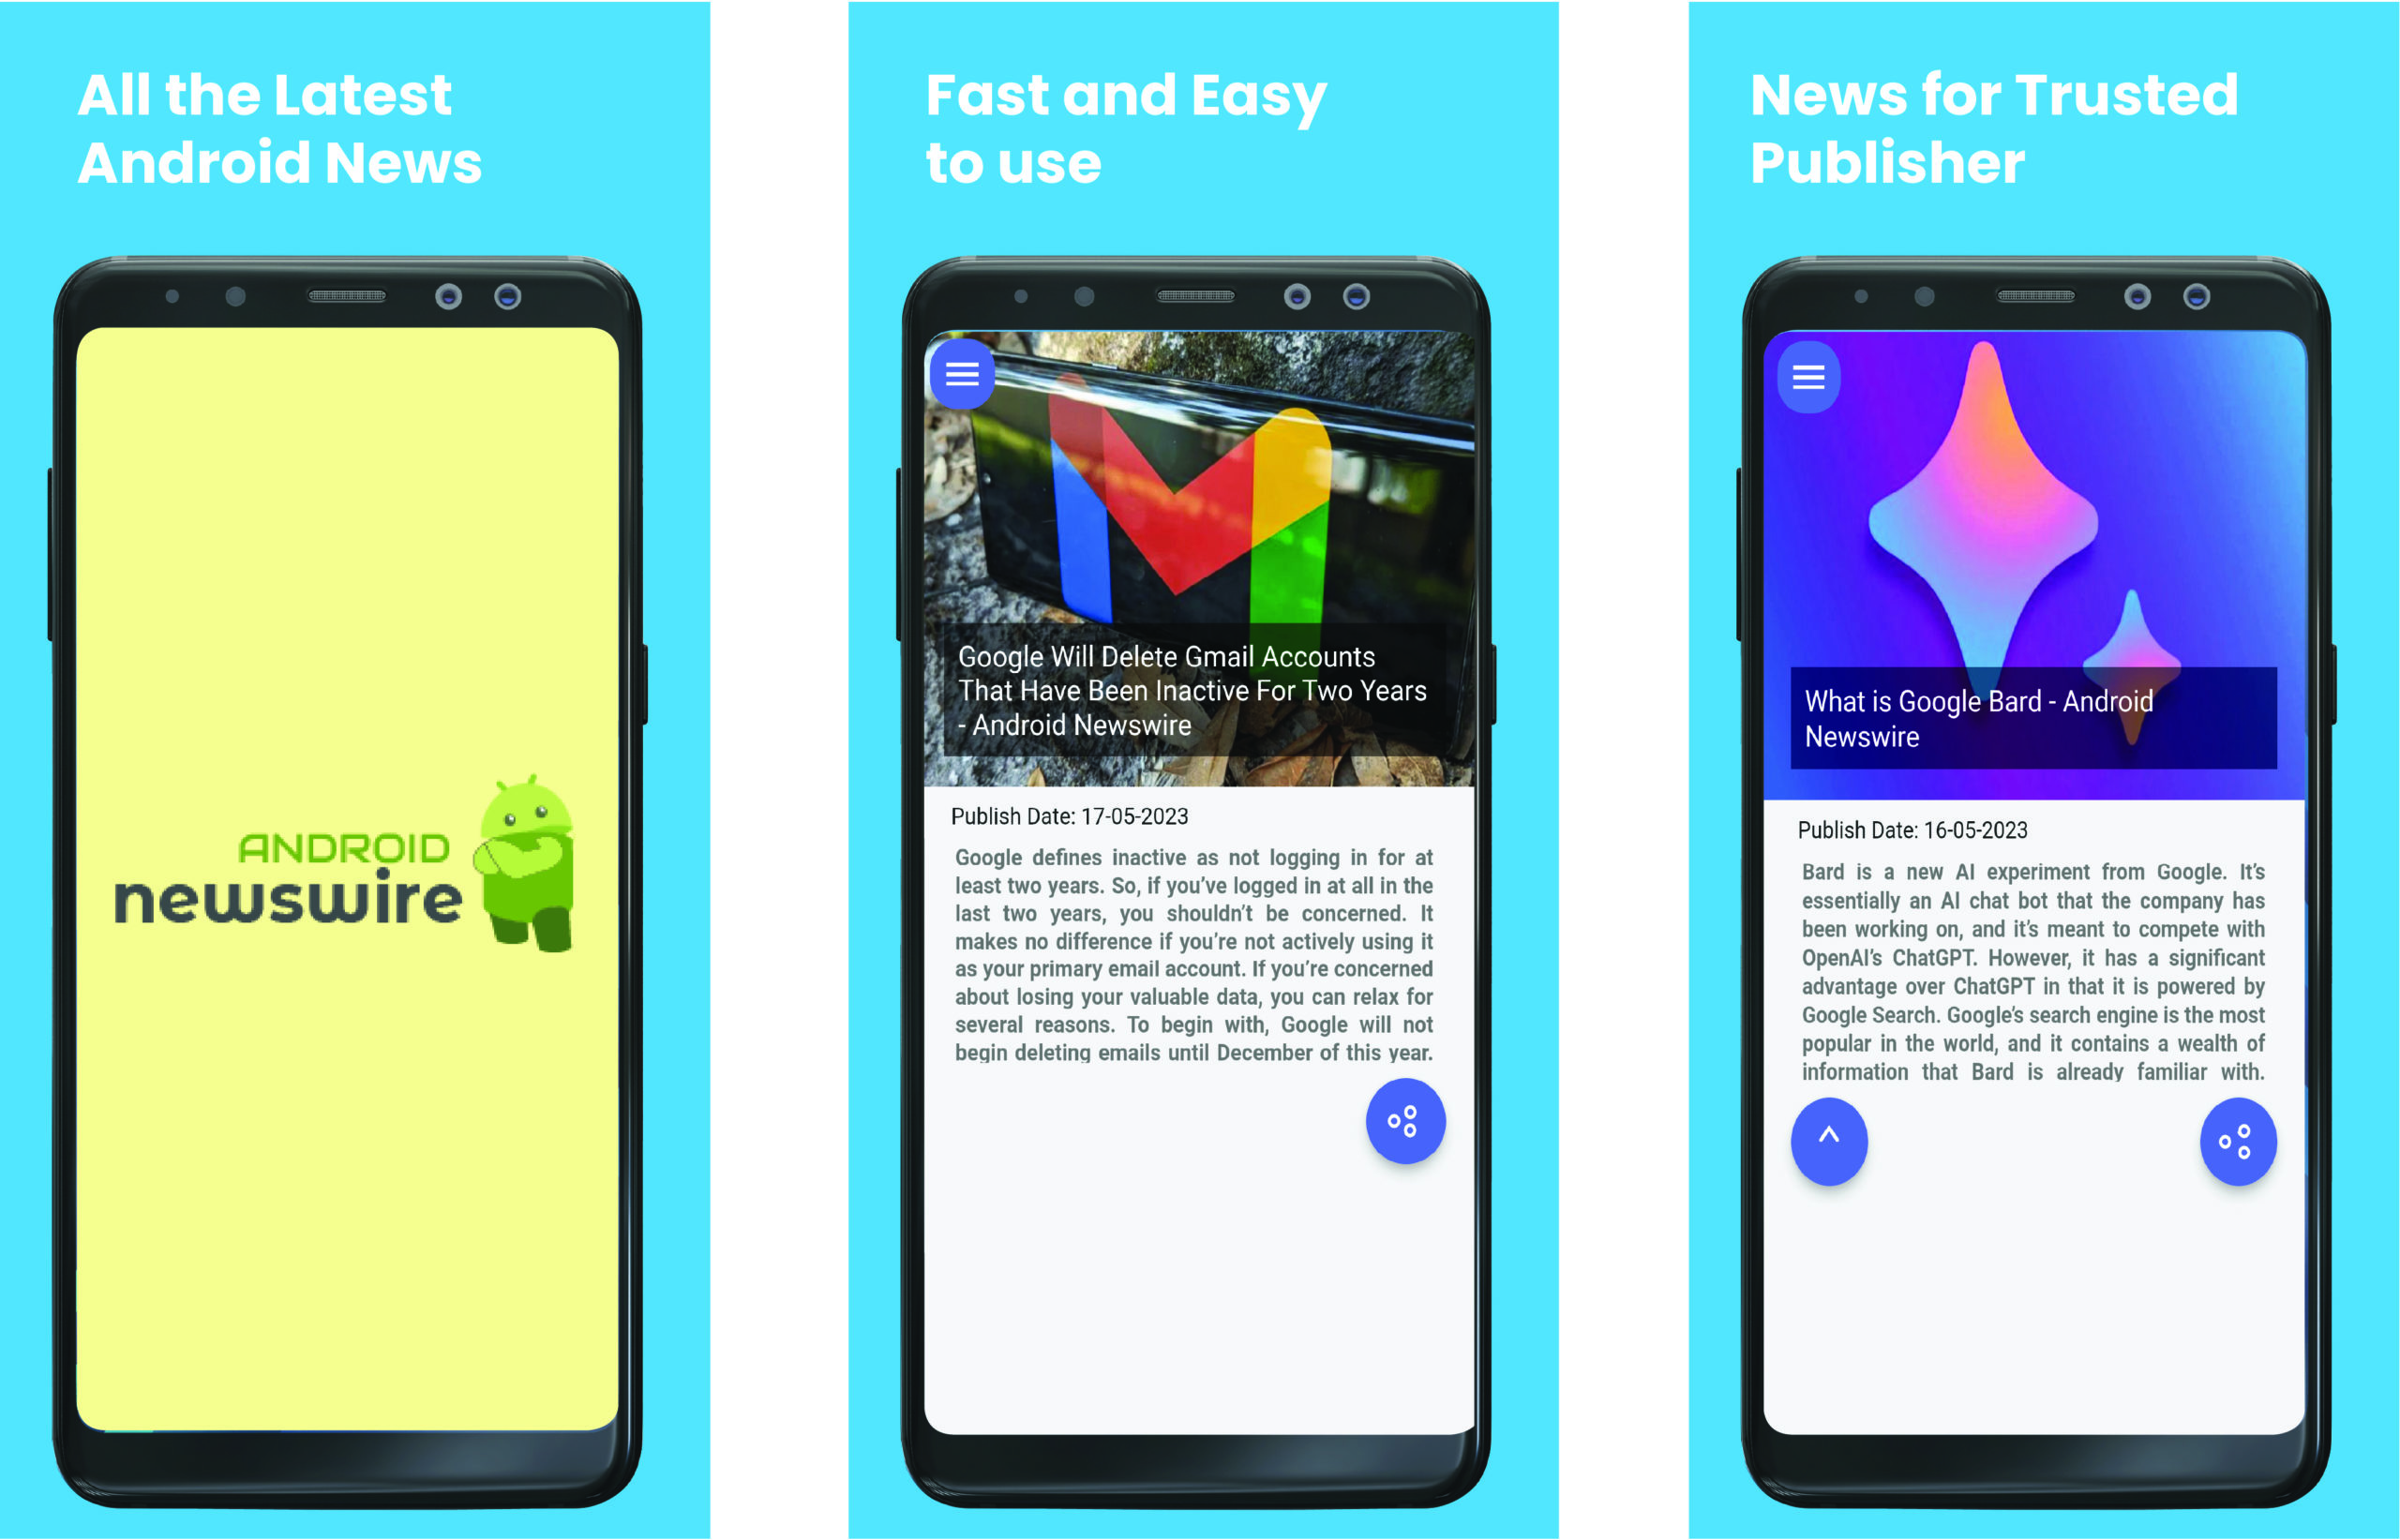 ANDROID NEWSWIRE